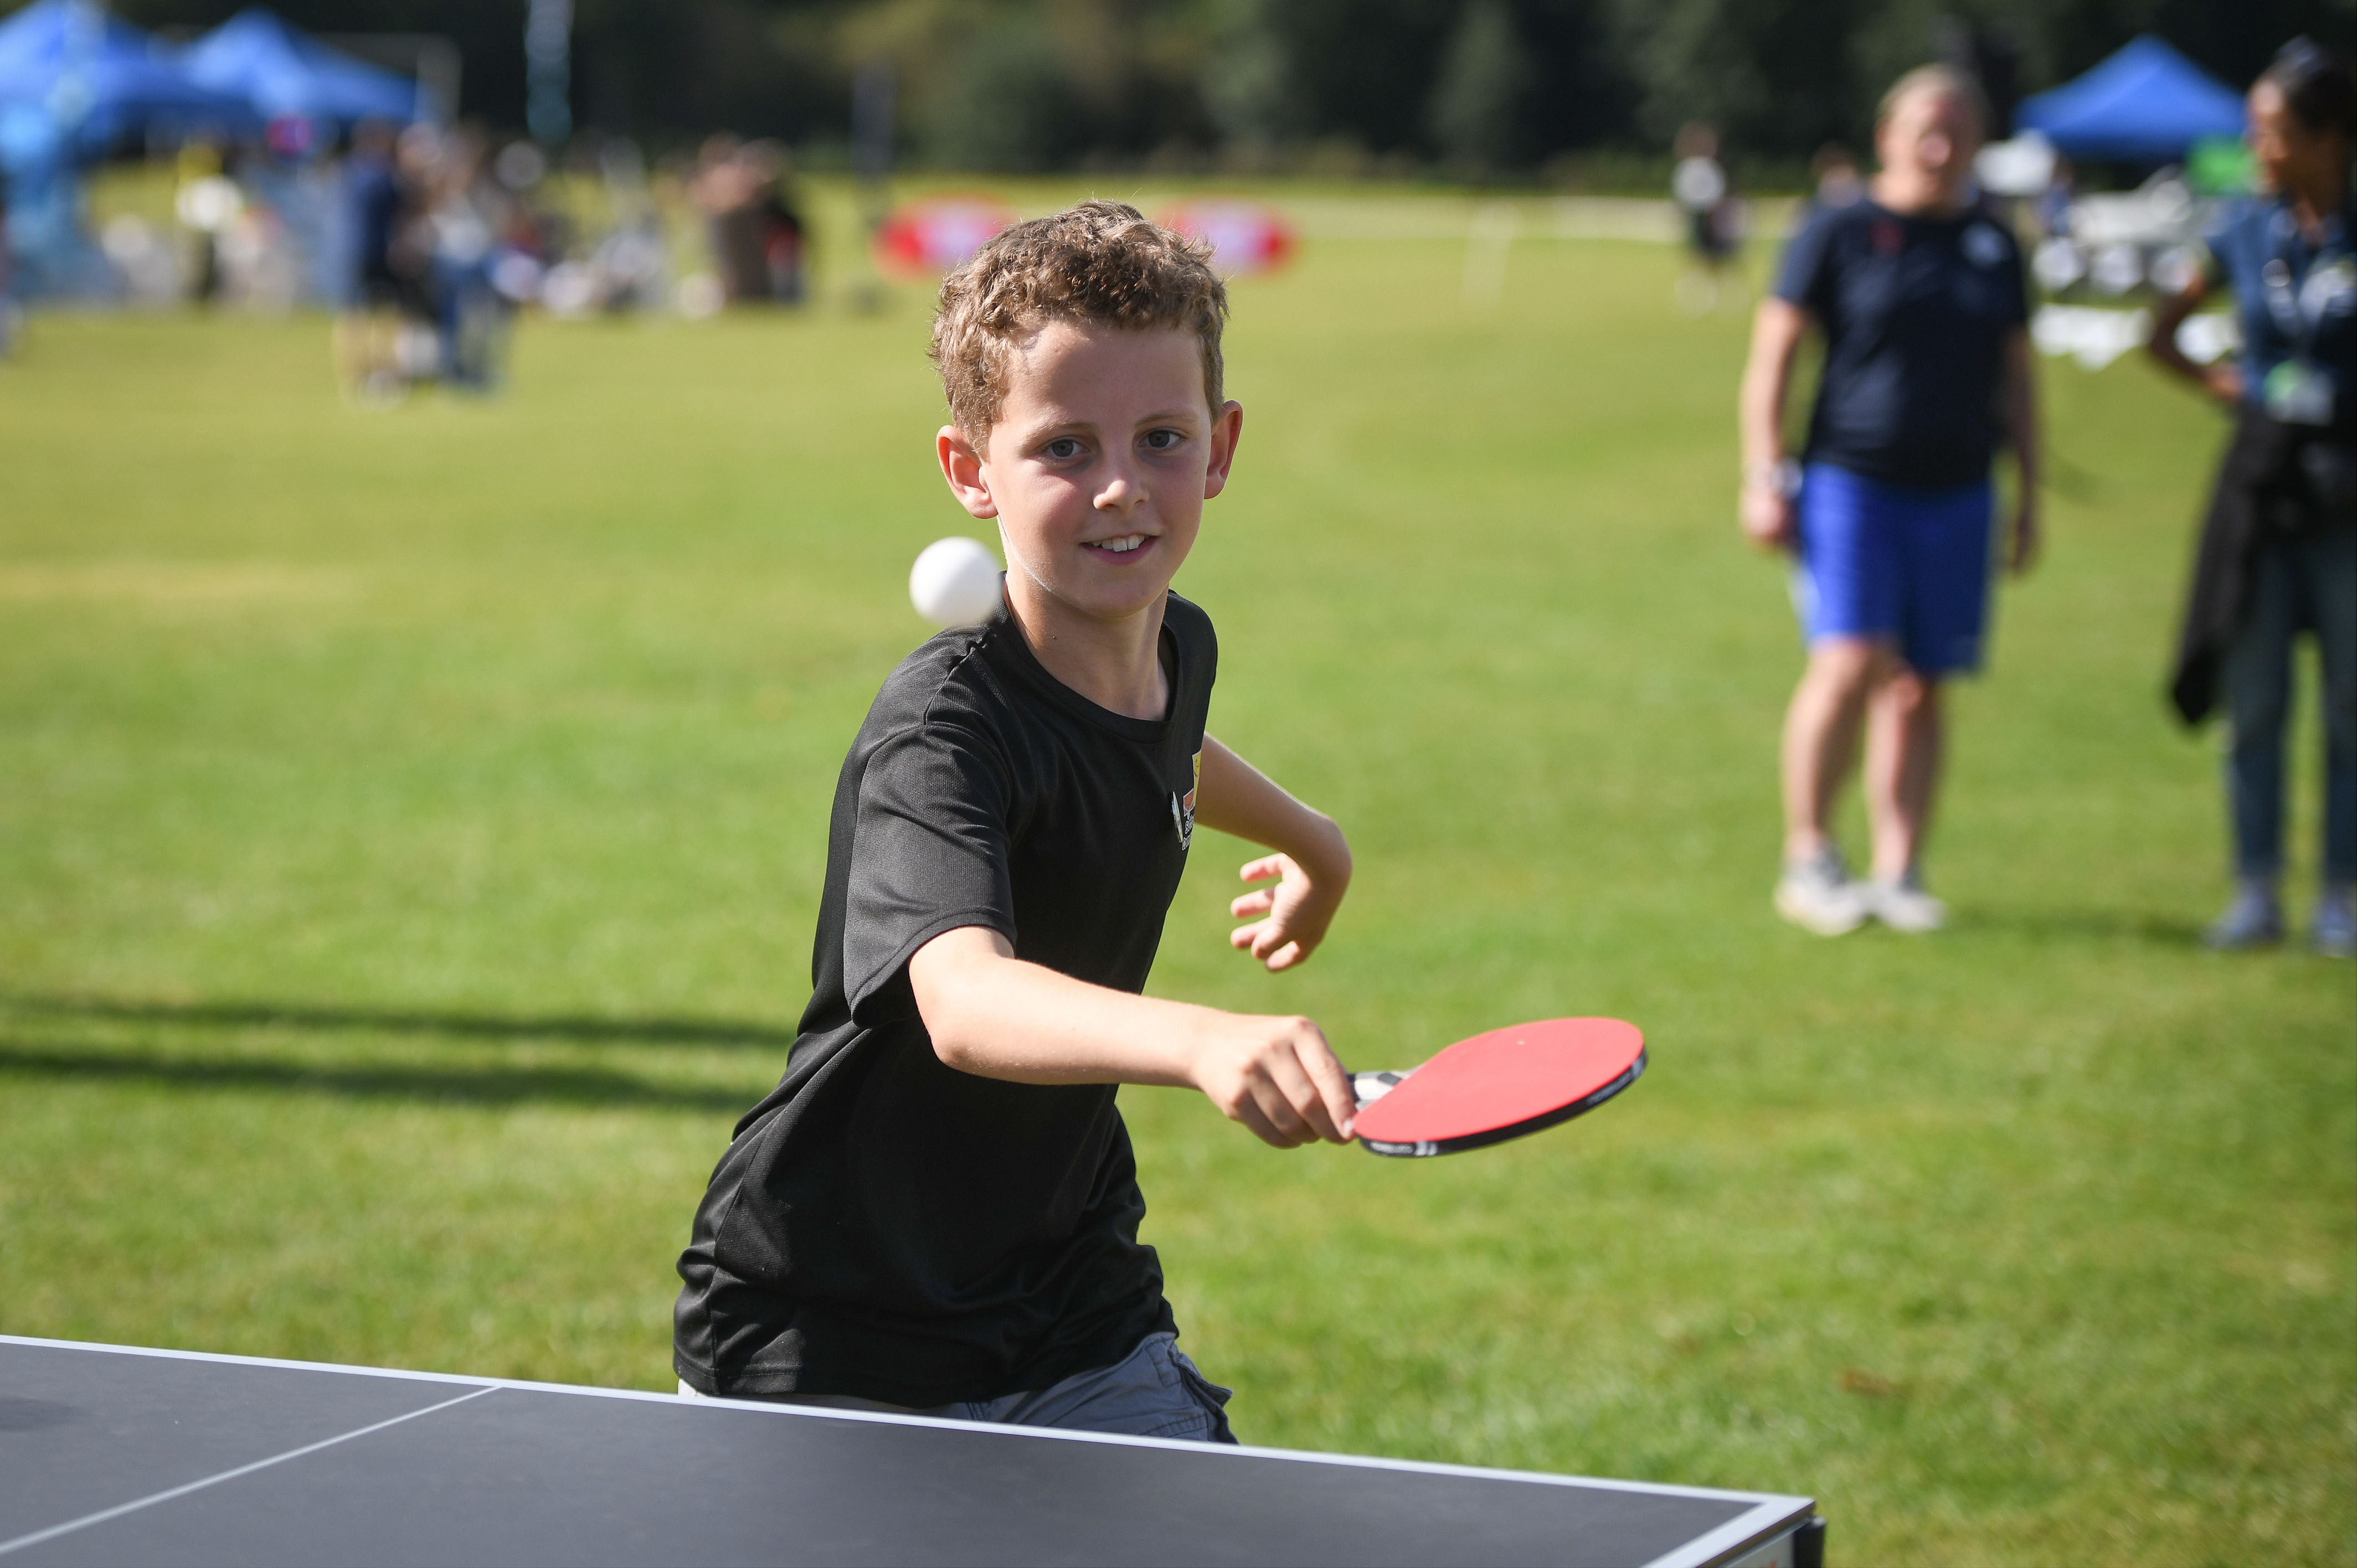 Lichfield Community Games takes place on 16 and 17 September.